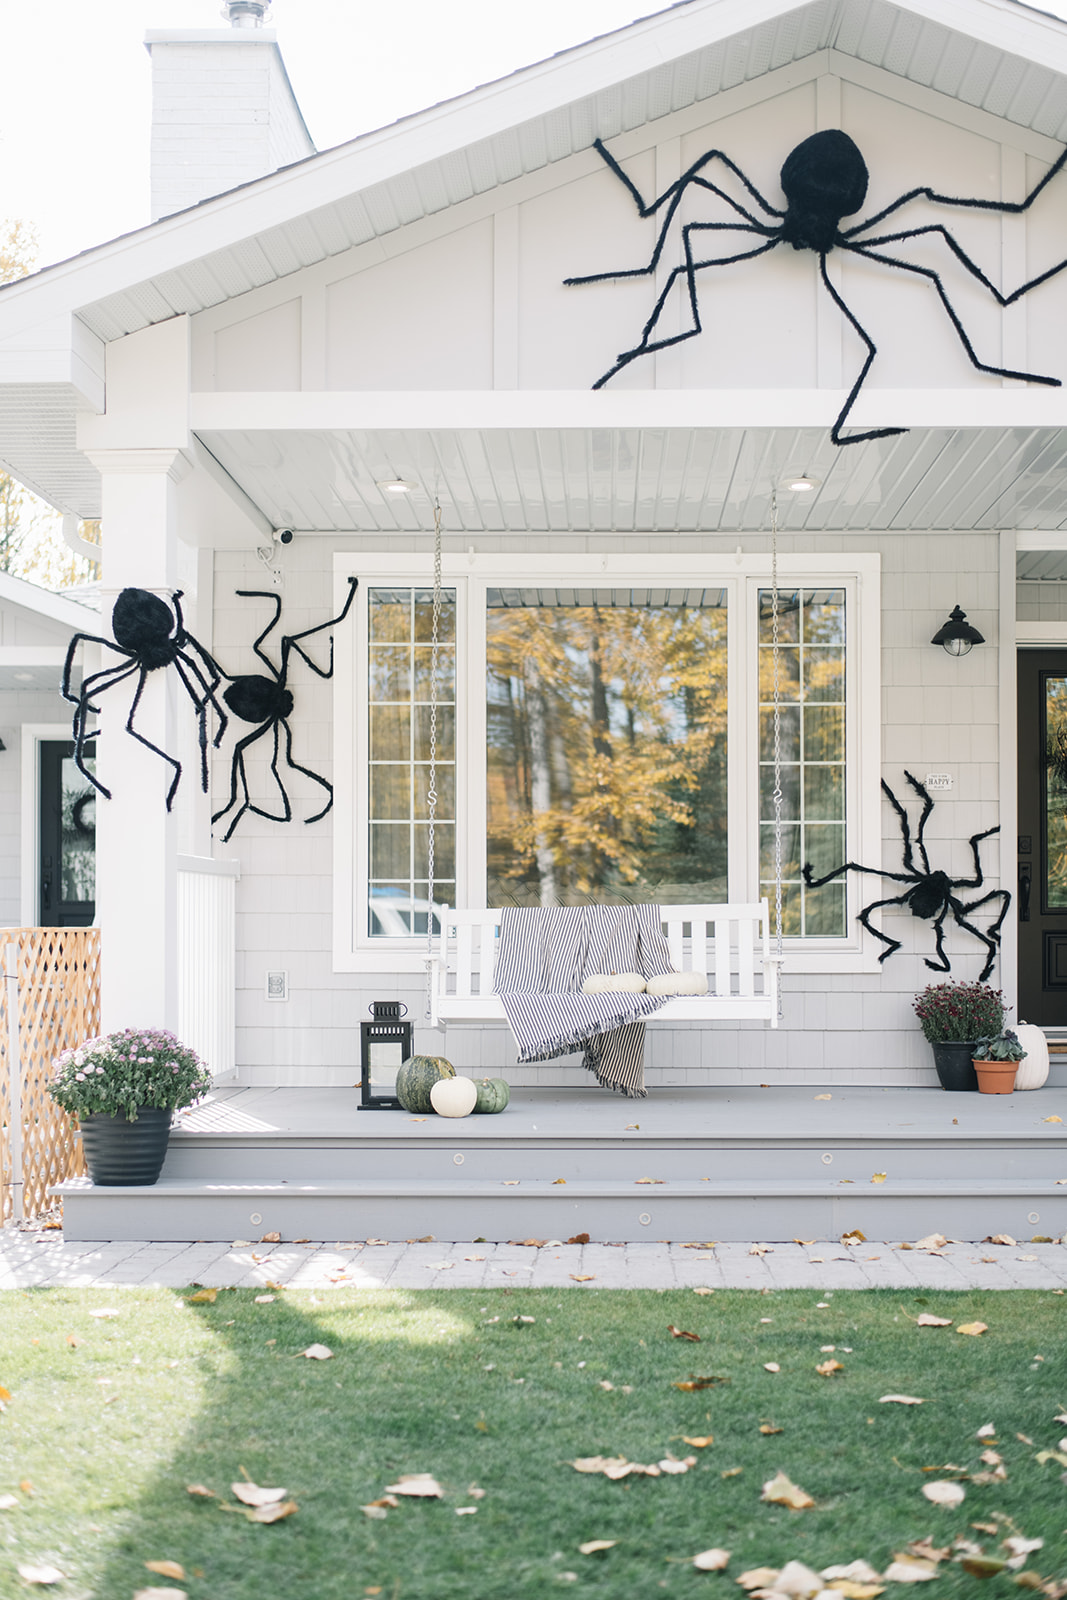 giant spiders on a house